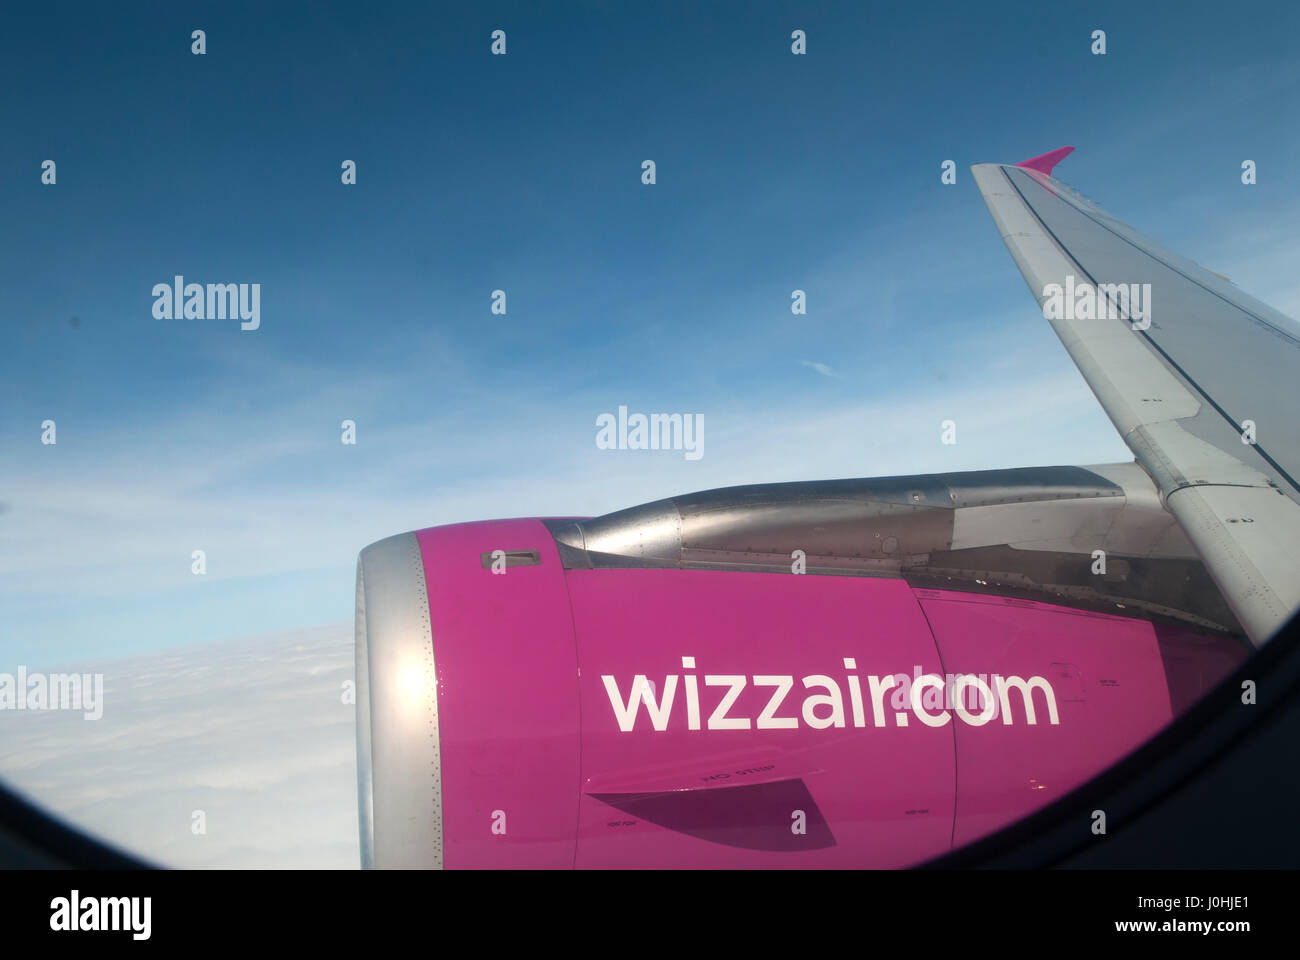 Wizzair.com logo wizz air airplane flying 2017 2010s HOMER SYKES Stock Photo